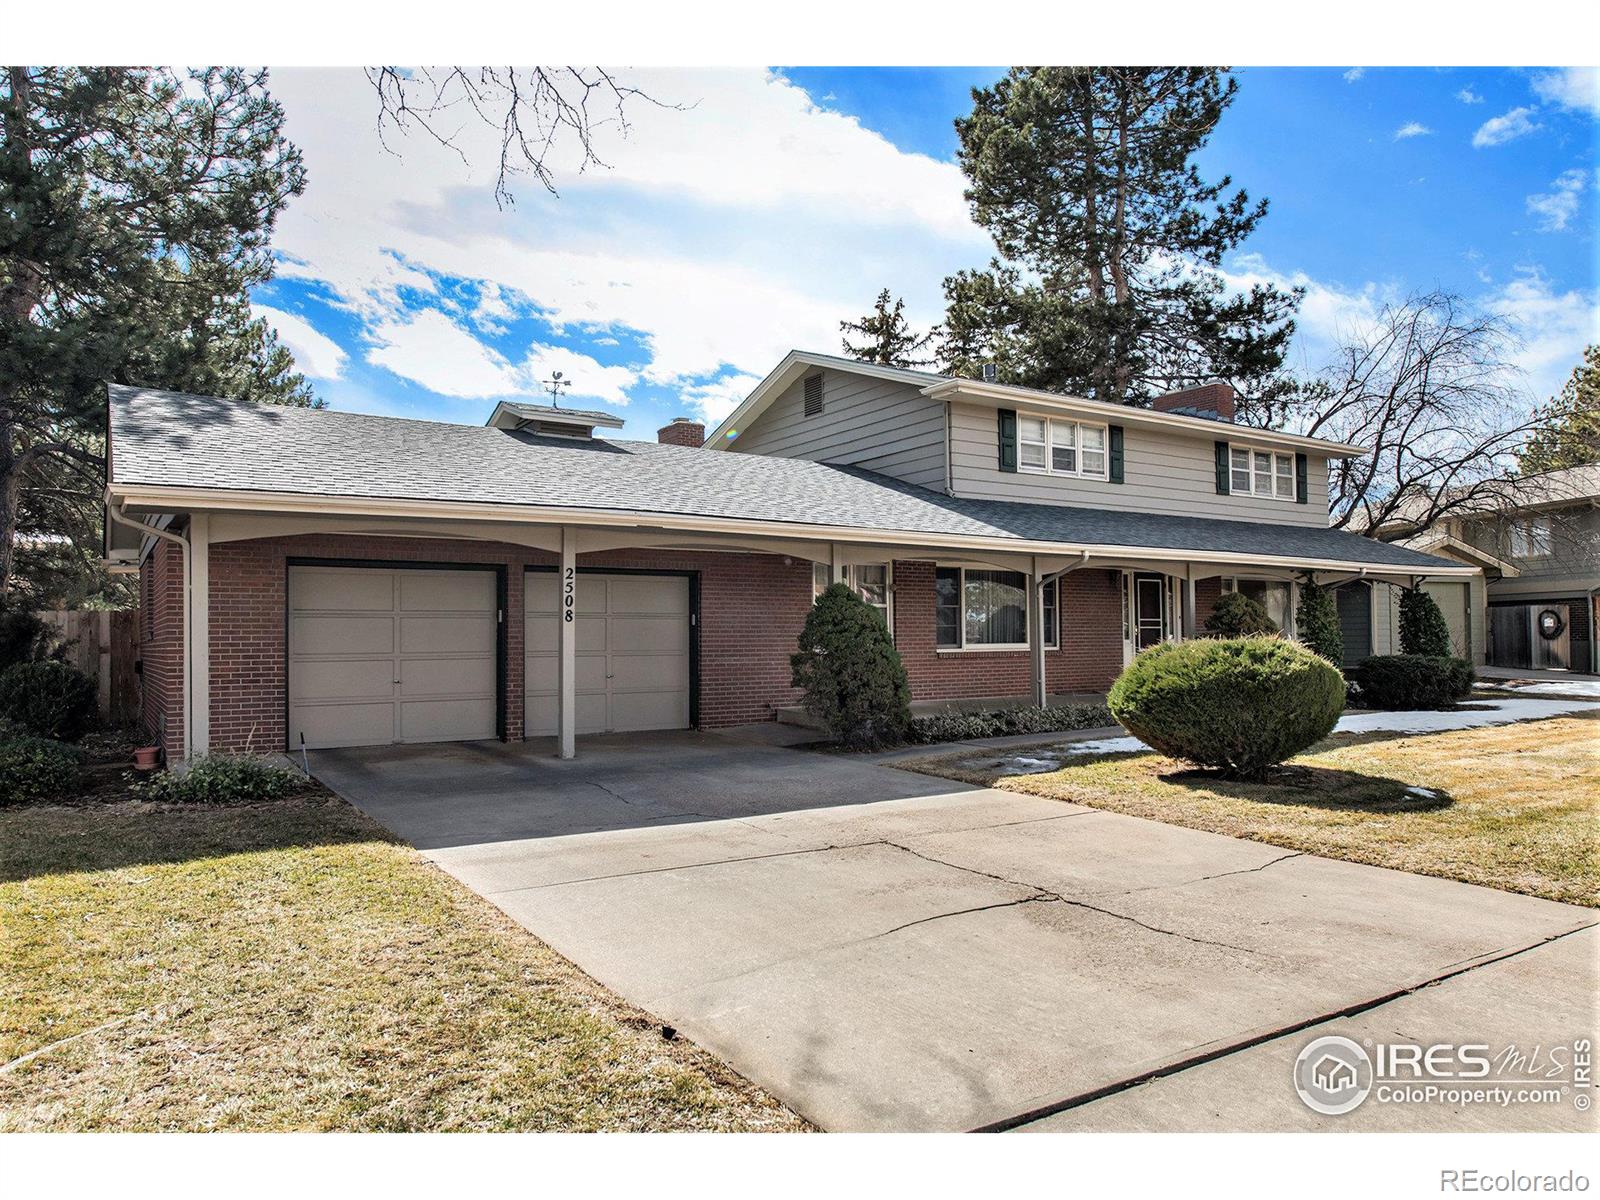 2508 W 20th St Rd, greeley MLS: 4567891004724 Beds: 4 Baths: 4 Price: $519,000